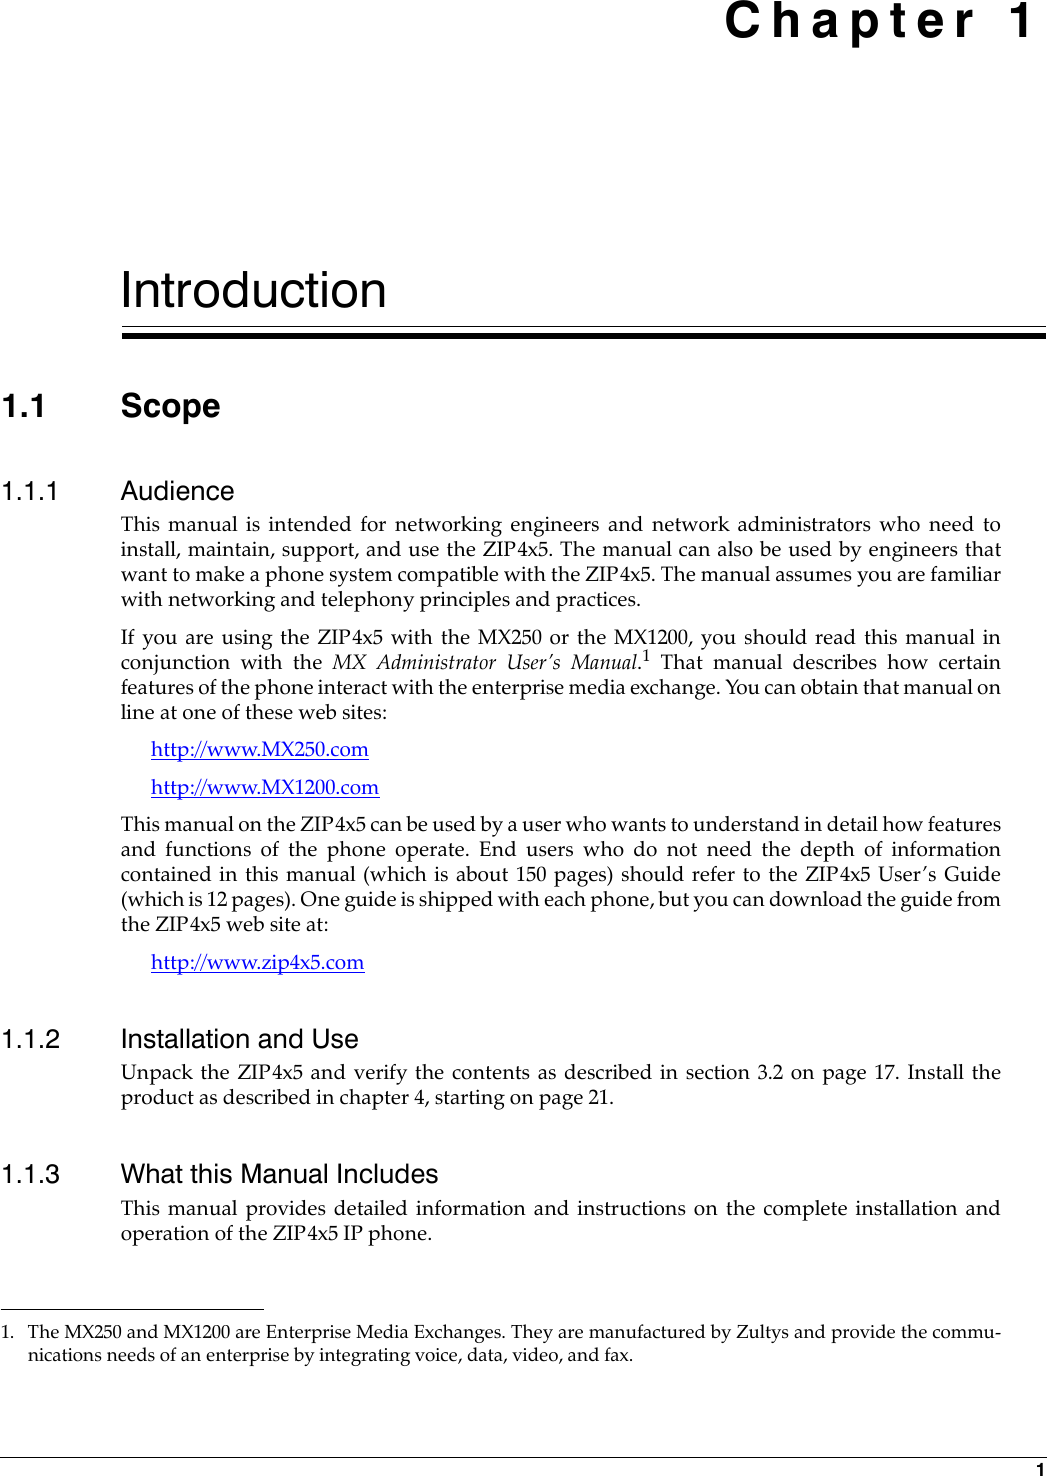 1 Chapter 1Introduction1.1 Scope1.1.1 AudienceThis manual is intended for networking engineers and network administrators who need toinstall, maintain, support, and use the ZIP4x5. The manual can also be used by engineers thatwant to make a phone system compatible with the ZIP4x5. The manual assumes you are familiarwith networking and telephony principles and practices.If you are using the ZIP4x5 with the MX250 or the MX1200, you should read this manual inconjunction with the MX Administrator User’s Manual.1 That manual describes how certainfeatures of the phone interact with the enterprise media exchange. You can obtain that manual online at one of these web sites:http://www.MX250.comhttp://www.MX1200.comThis manual on the ZIP4x5 can be used by a user who wants to understand in detail how featuresand functions of the phone operate. End users who do not need the depth of informationcontained in this manual (which is about 150 pages) should refer to the ZIP4x5 User’s Guide(which is 12 pages). One guide is shipped with each phone, but you can download the guide fromthe ZIP4x5 web site at:http://www.zip4x5.com1.1.2 Installation and UseUnpack the ZIP4x5 and verify the contents as described in section 3.2 on page 17. Install theproduct as described in chapter 4, starting on page 21.1.1.3 What this Manual IncludesThis manual provides detailed information and instructions on the complete installation andoperation of the ZIP4x5 IP phone.1. The MX250 and MX1200 are Enterprise Media Exchanges. They are manufactured by Zultys and provide the commu-nications needs of an enterprise by integrating voice, data, video, and fax.